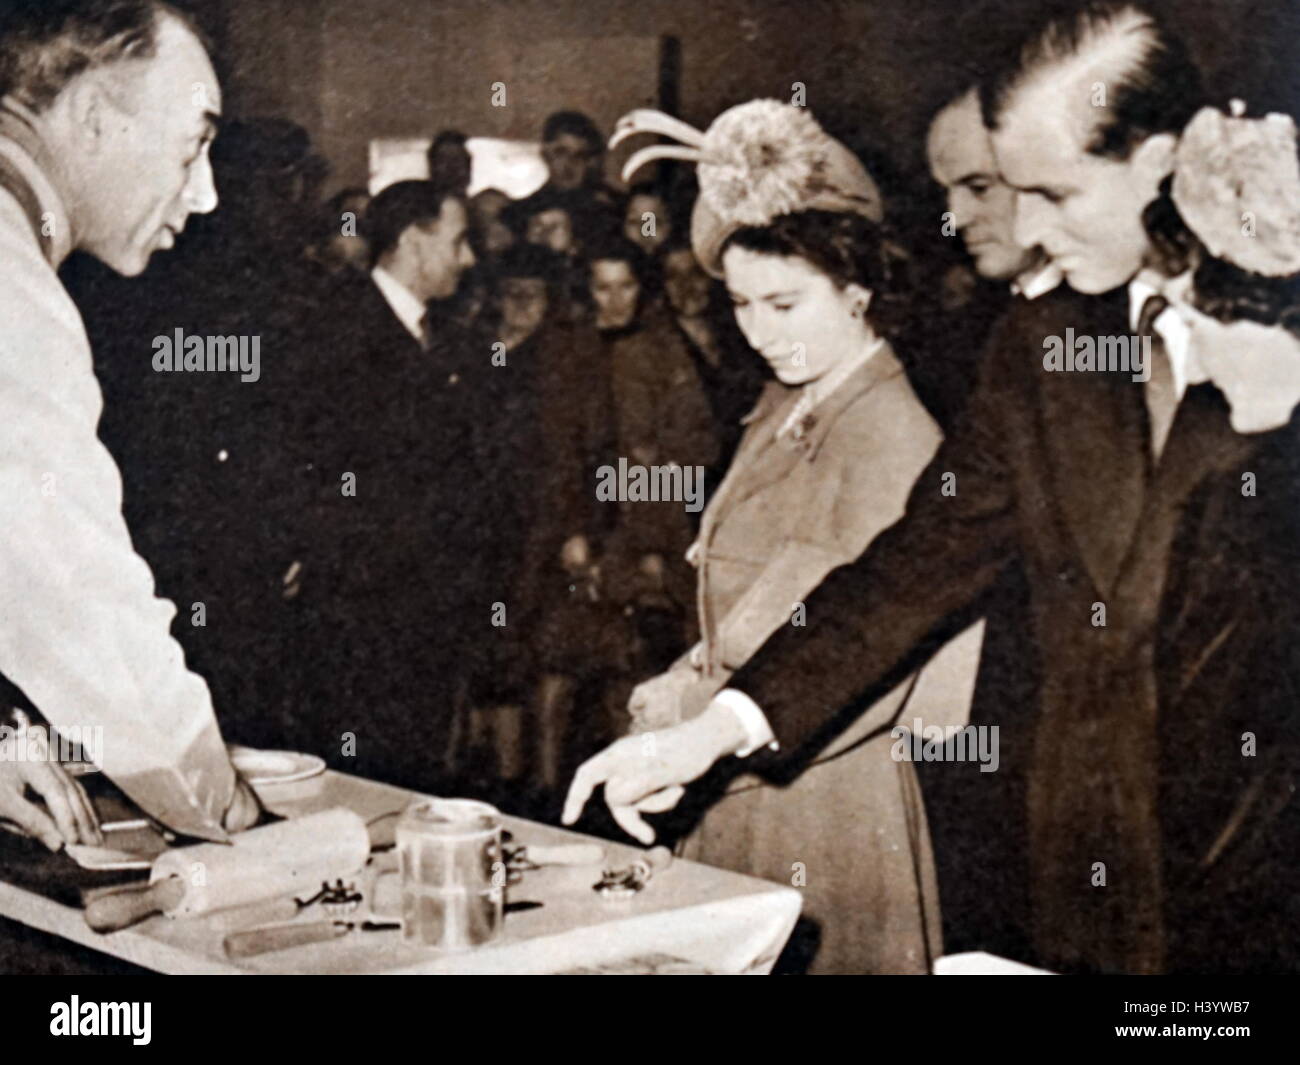 Photograph of Queen Elizabeth II and Prince Philip, Duke of Edinburgh at the Pastry Making Exhibit at Olympia. Dated 20th Century Stock Photo